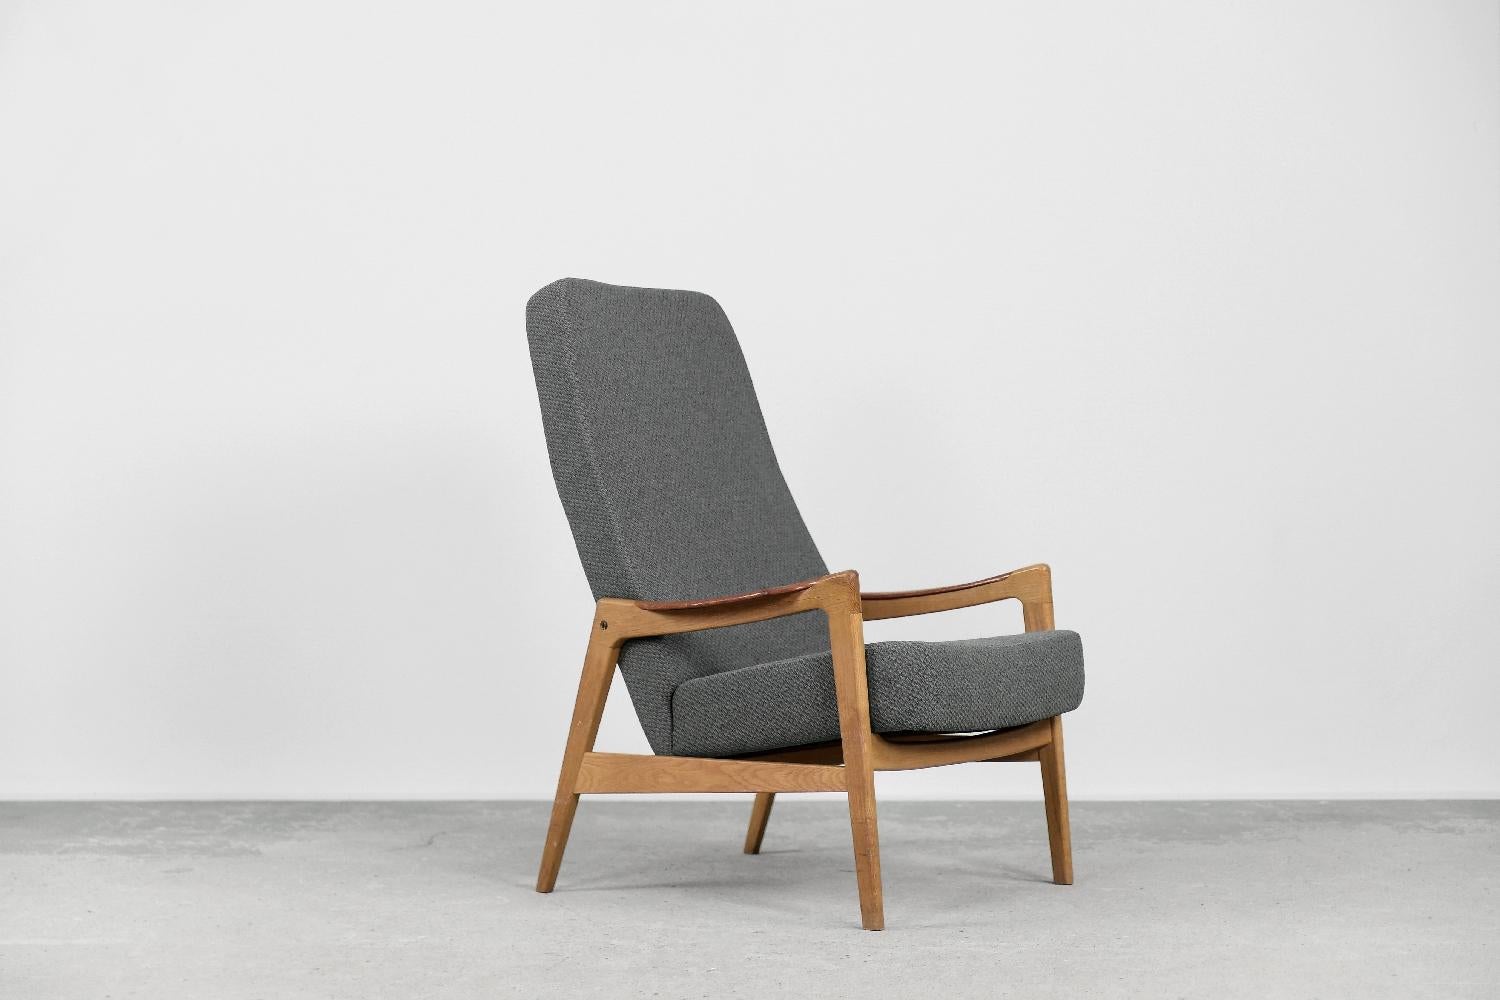 This modernist armchair was made by the Swedish manufacture OPE Möbler during the 1960s. The frame is made of solid oak wood in a light shade of brown. The armrests are made of teak. The seat and high backrest have been reupholstered with a